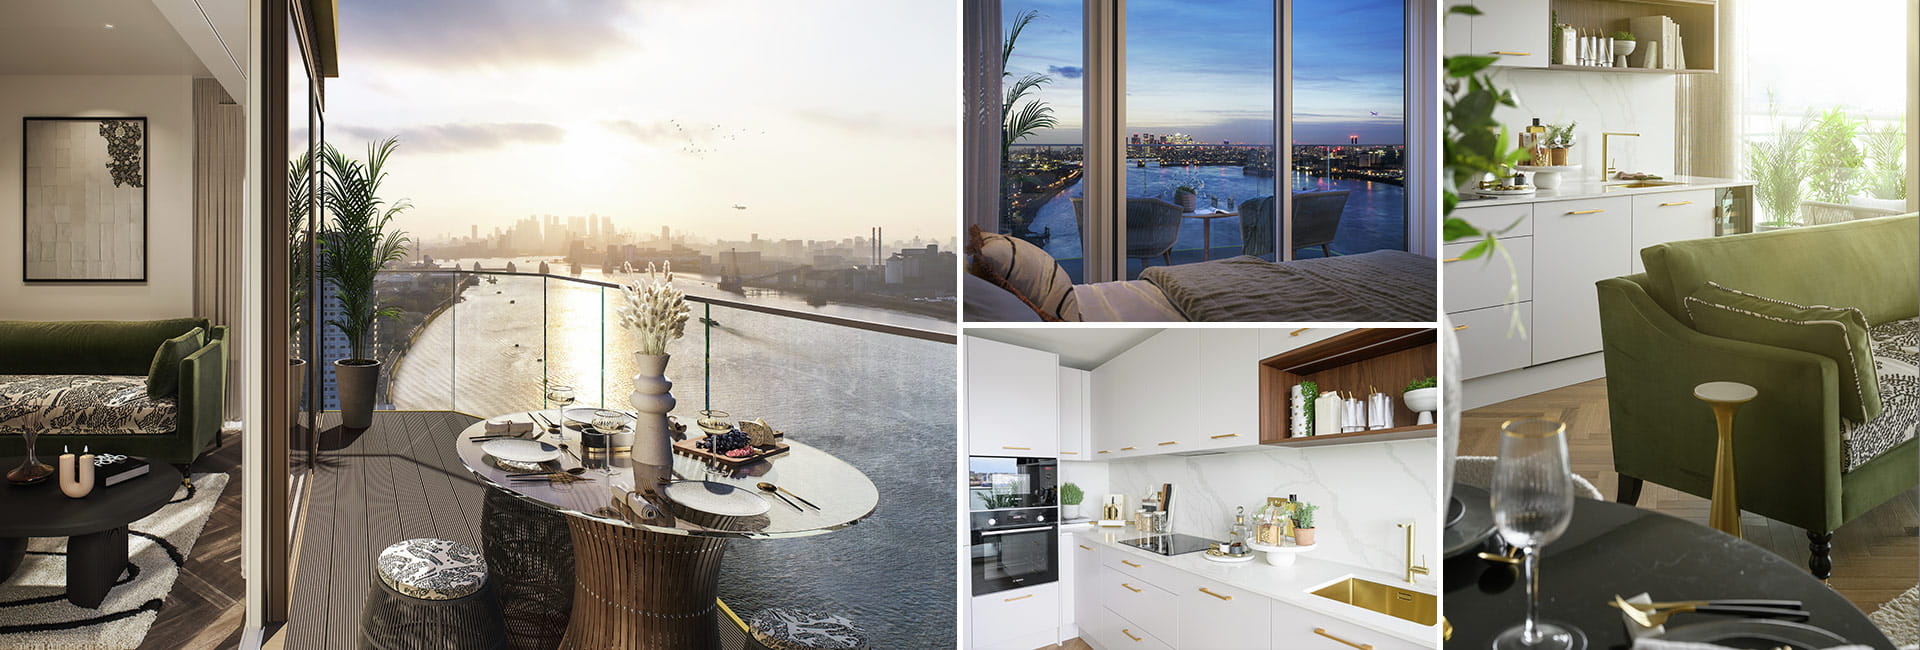 Montage image of interior images and balcony views looking at London City 